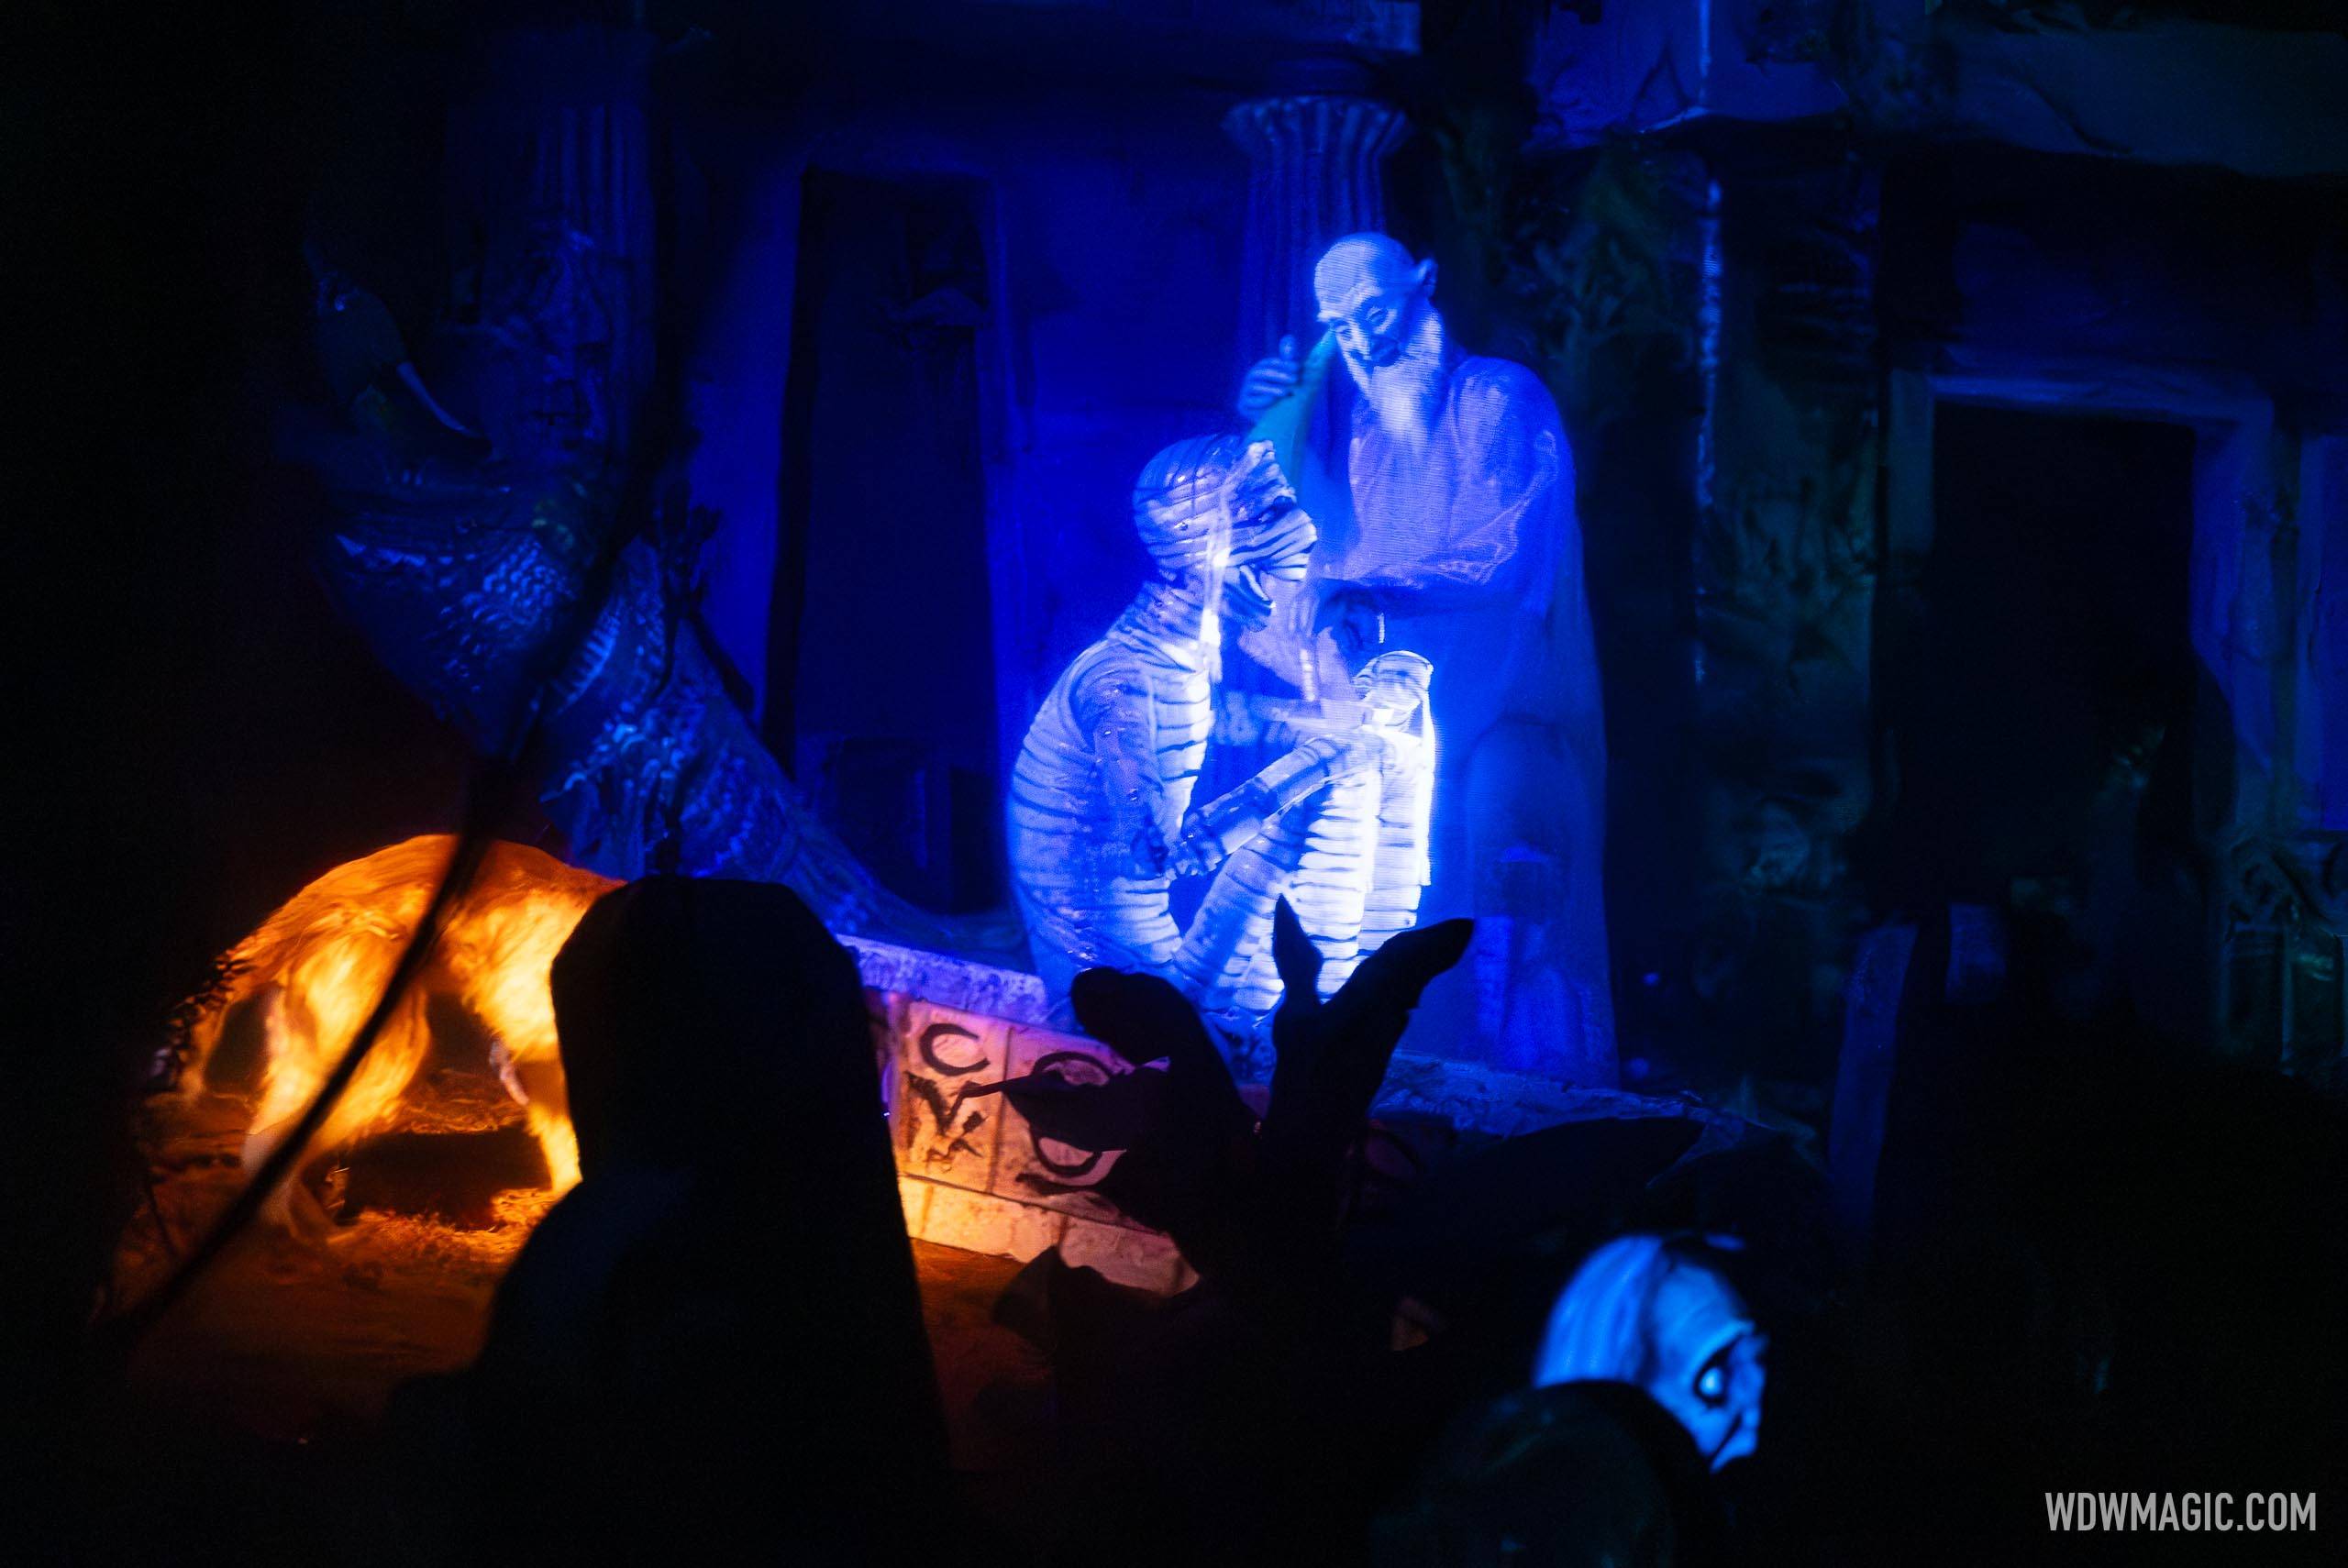 The Mummy Returns to the Haunted Mansion at Walt Disney World